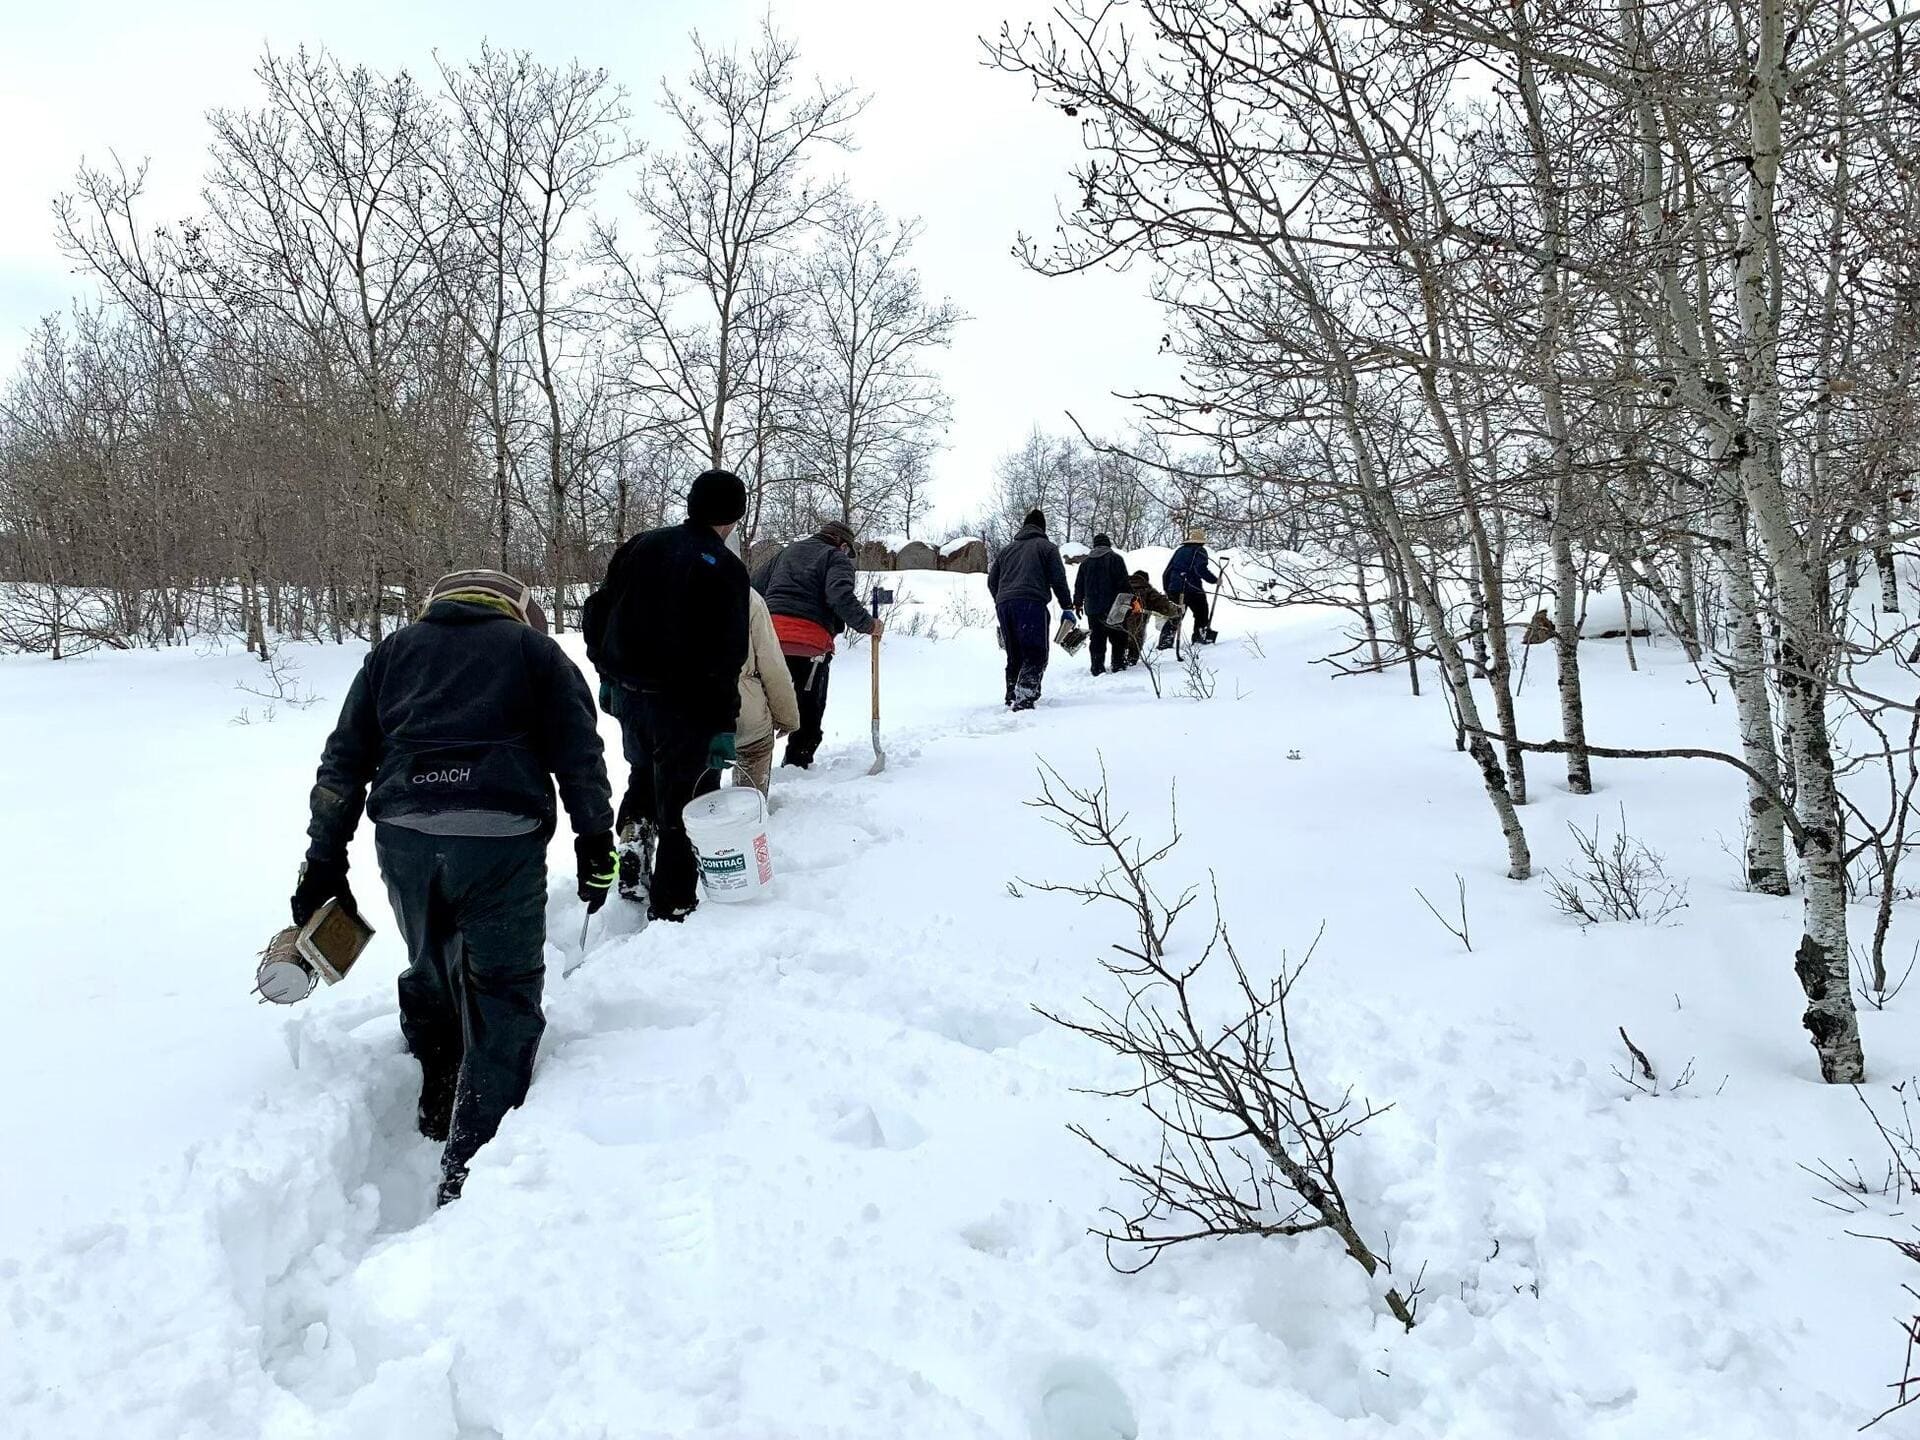 The beekeeping team trudges through deep snow to assess winter damage